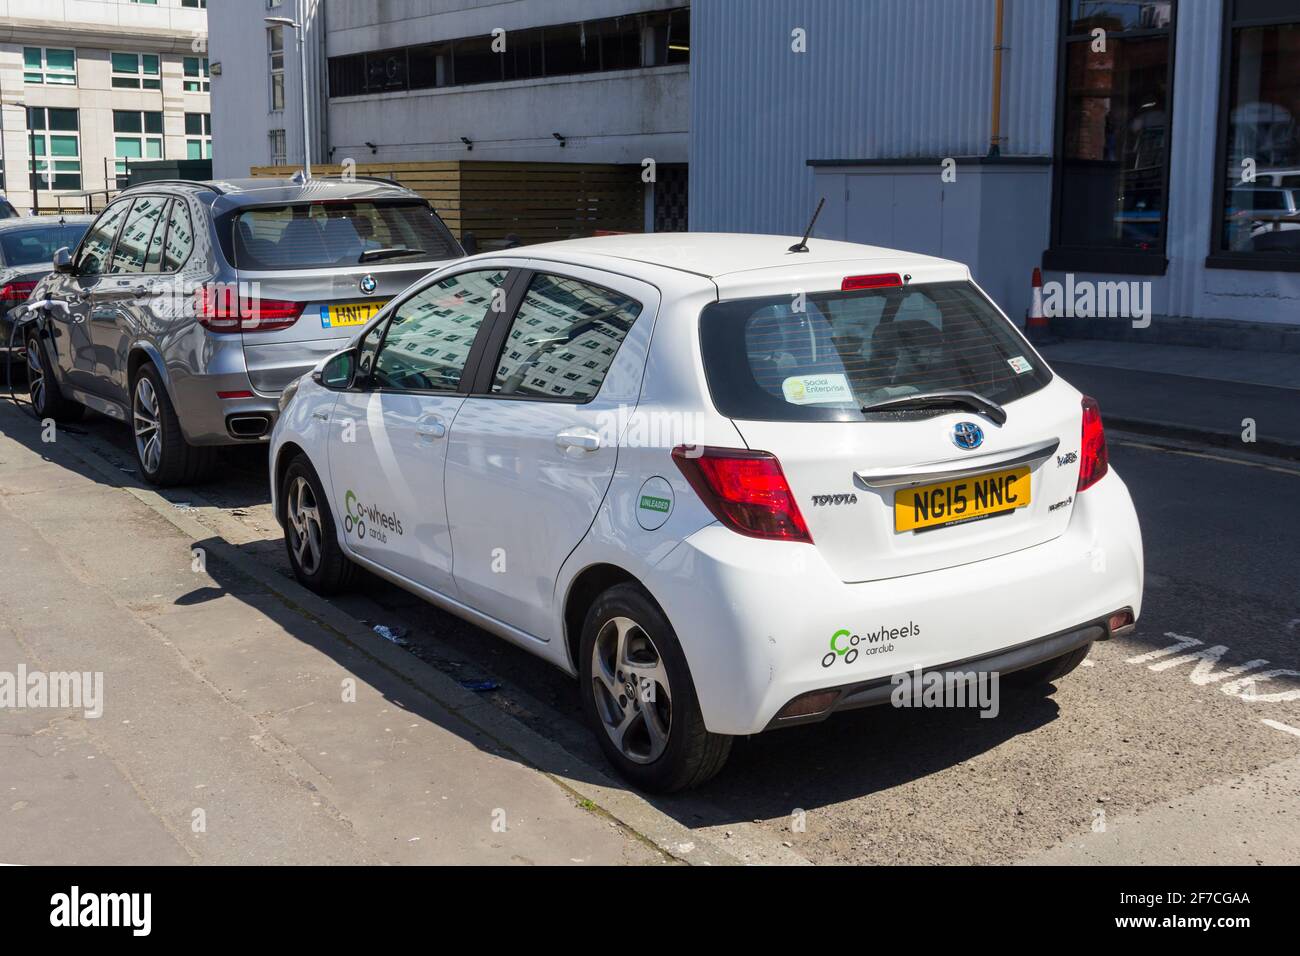 Toyota Yaris hybrid car operated by Co-Wheels car club  in one of their reserved parking spaces on Browncross Street in Salford, Greater Manchester. Stock Photo